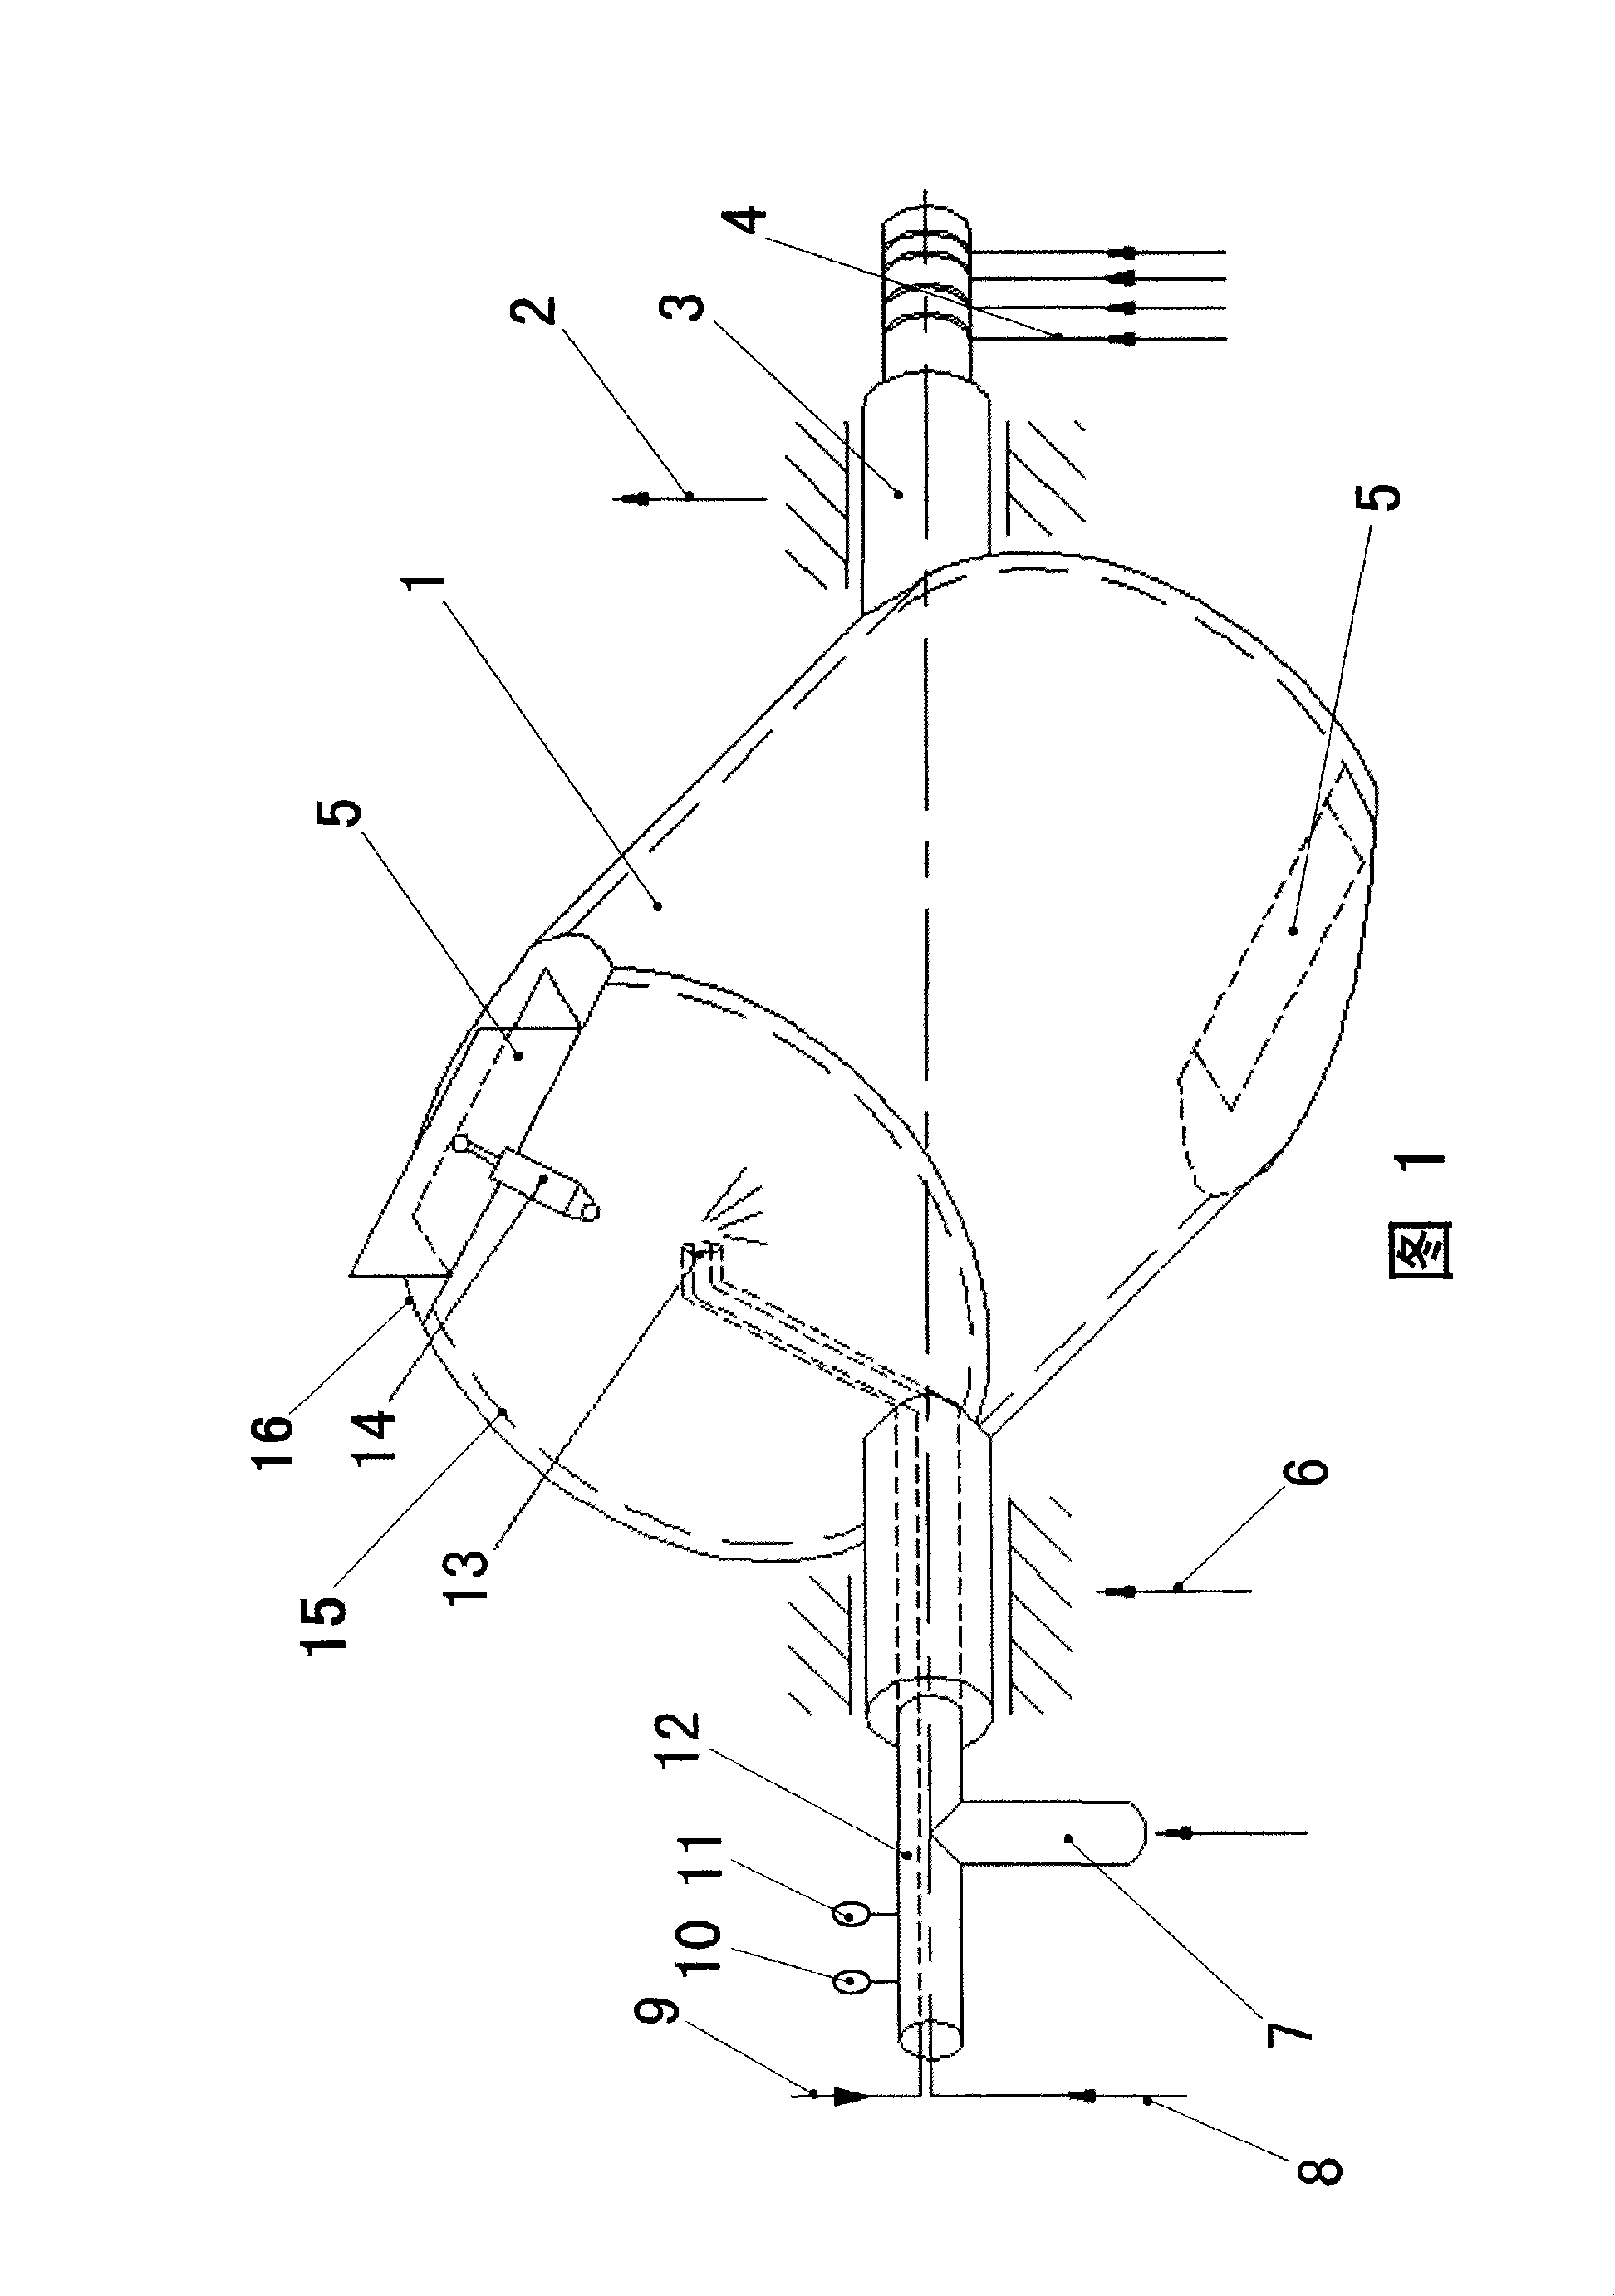 Cylindrical vacuum charger